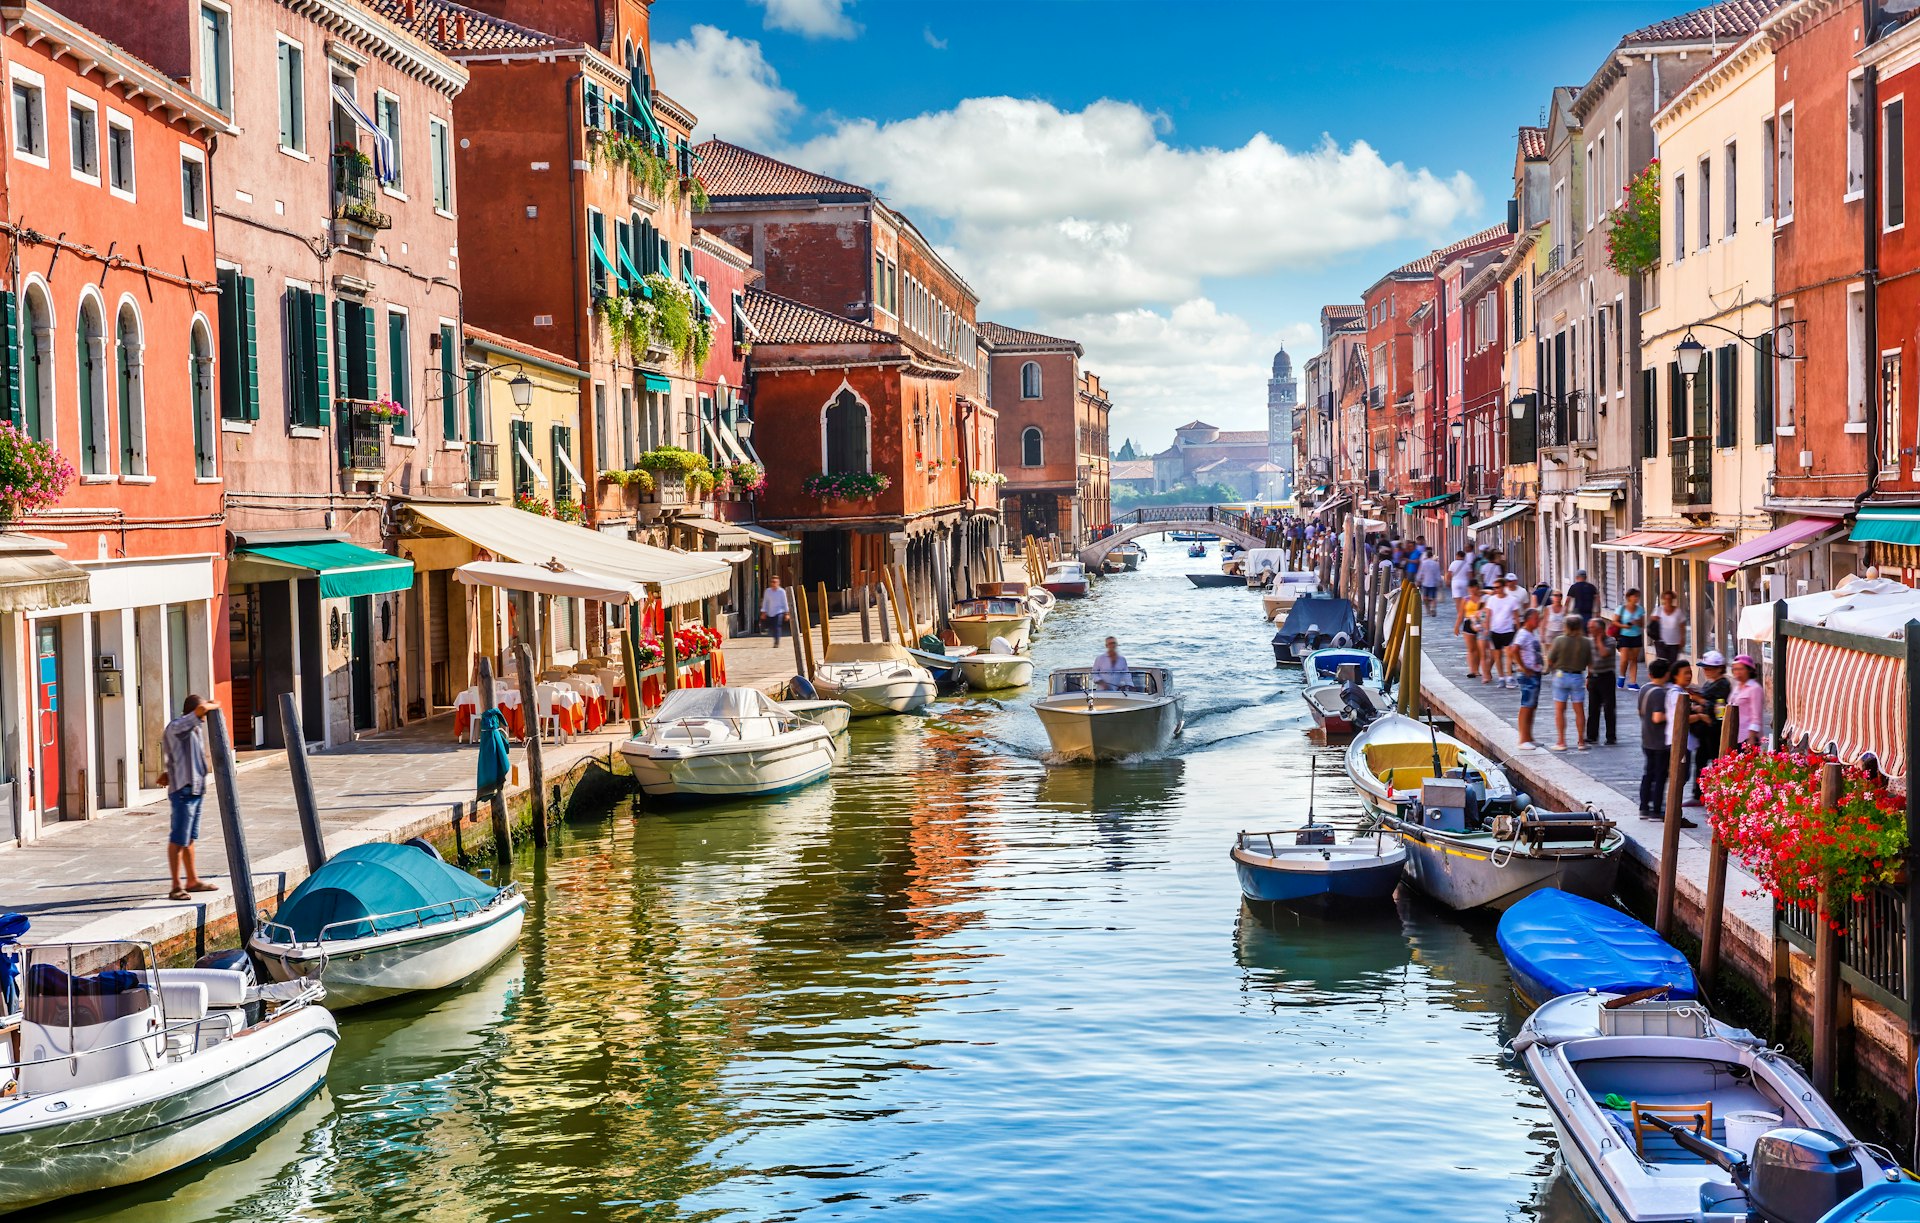 Visitors and boats in the canals of Murano Island